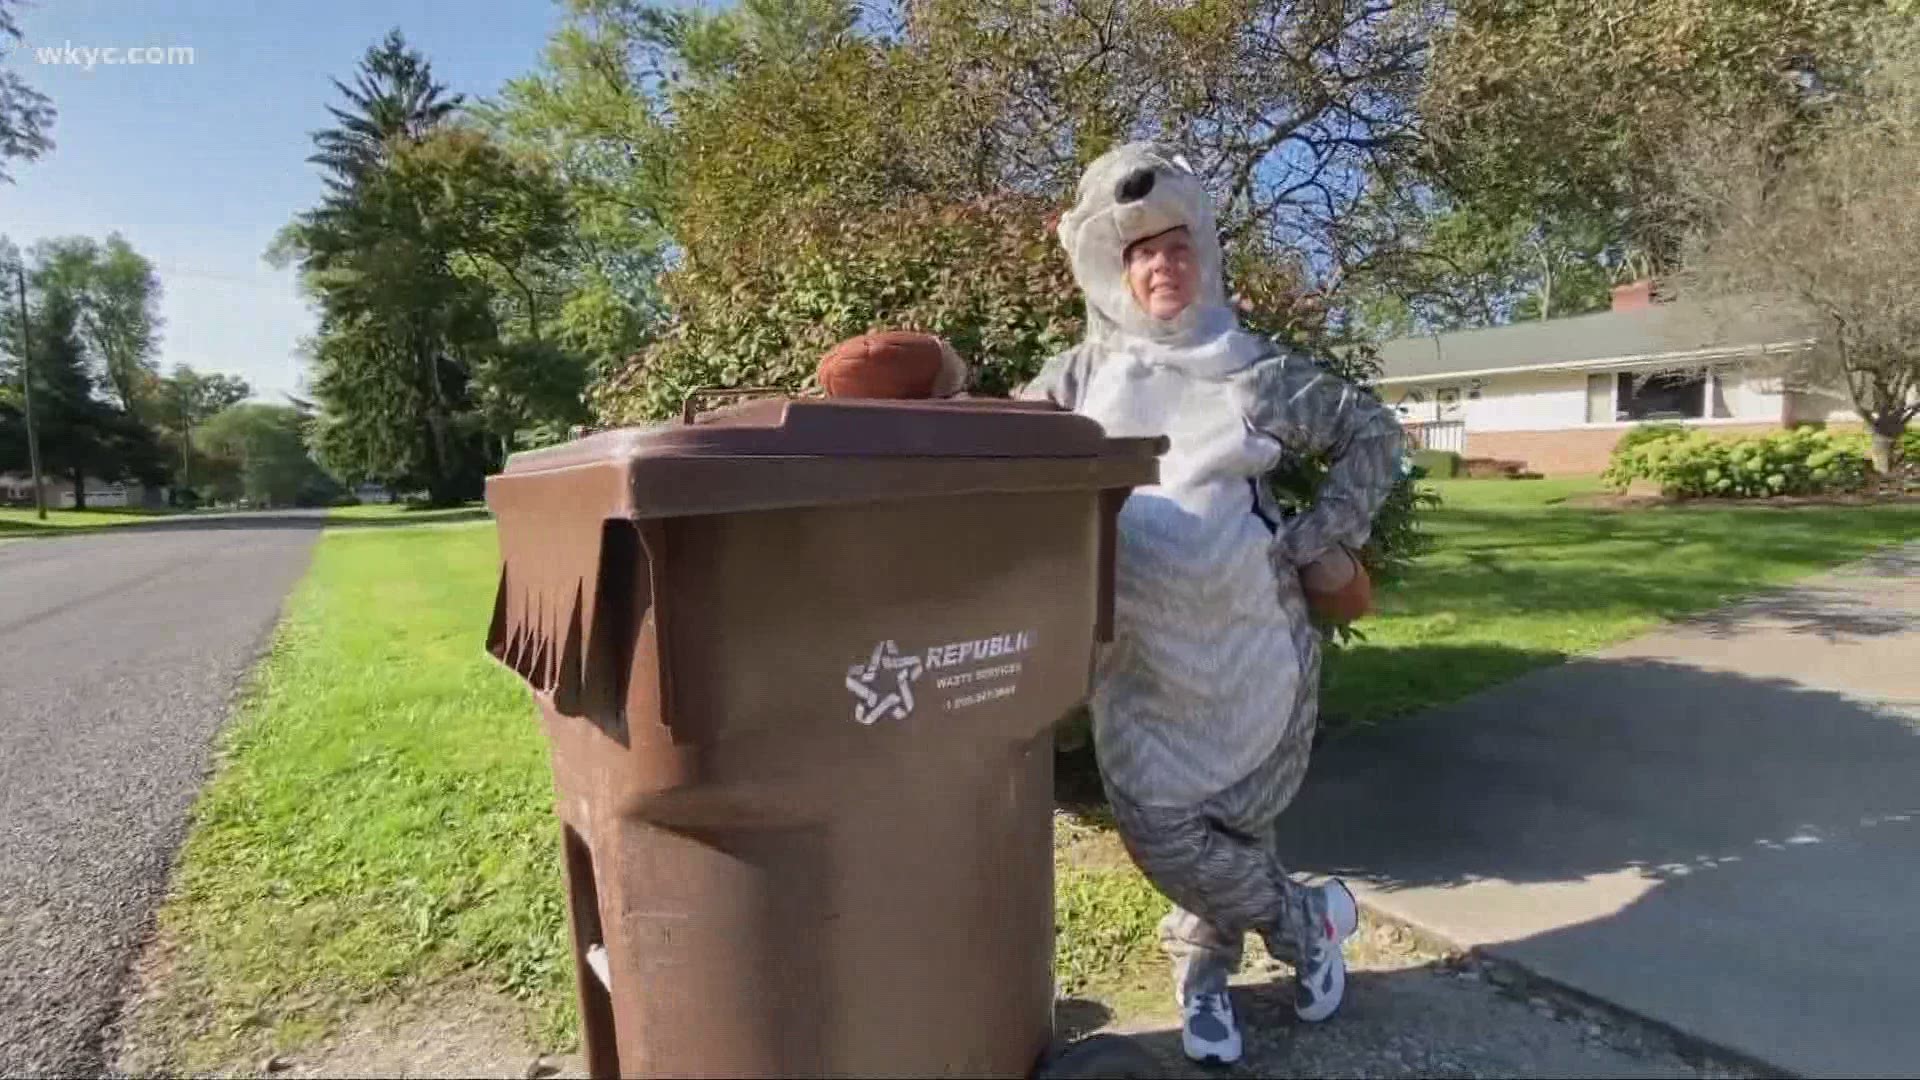 Oct. 8, 2020: Be honest. 2020 has been trash. So one Northeast Ohio woman is bringing smiles by taking out the trash each week while wearing different costumes.